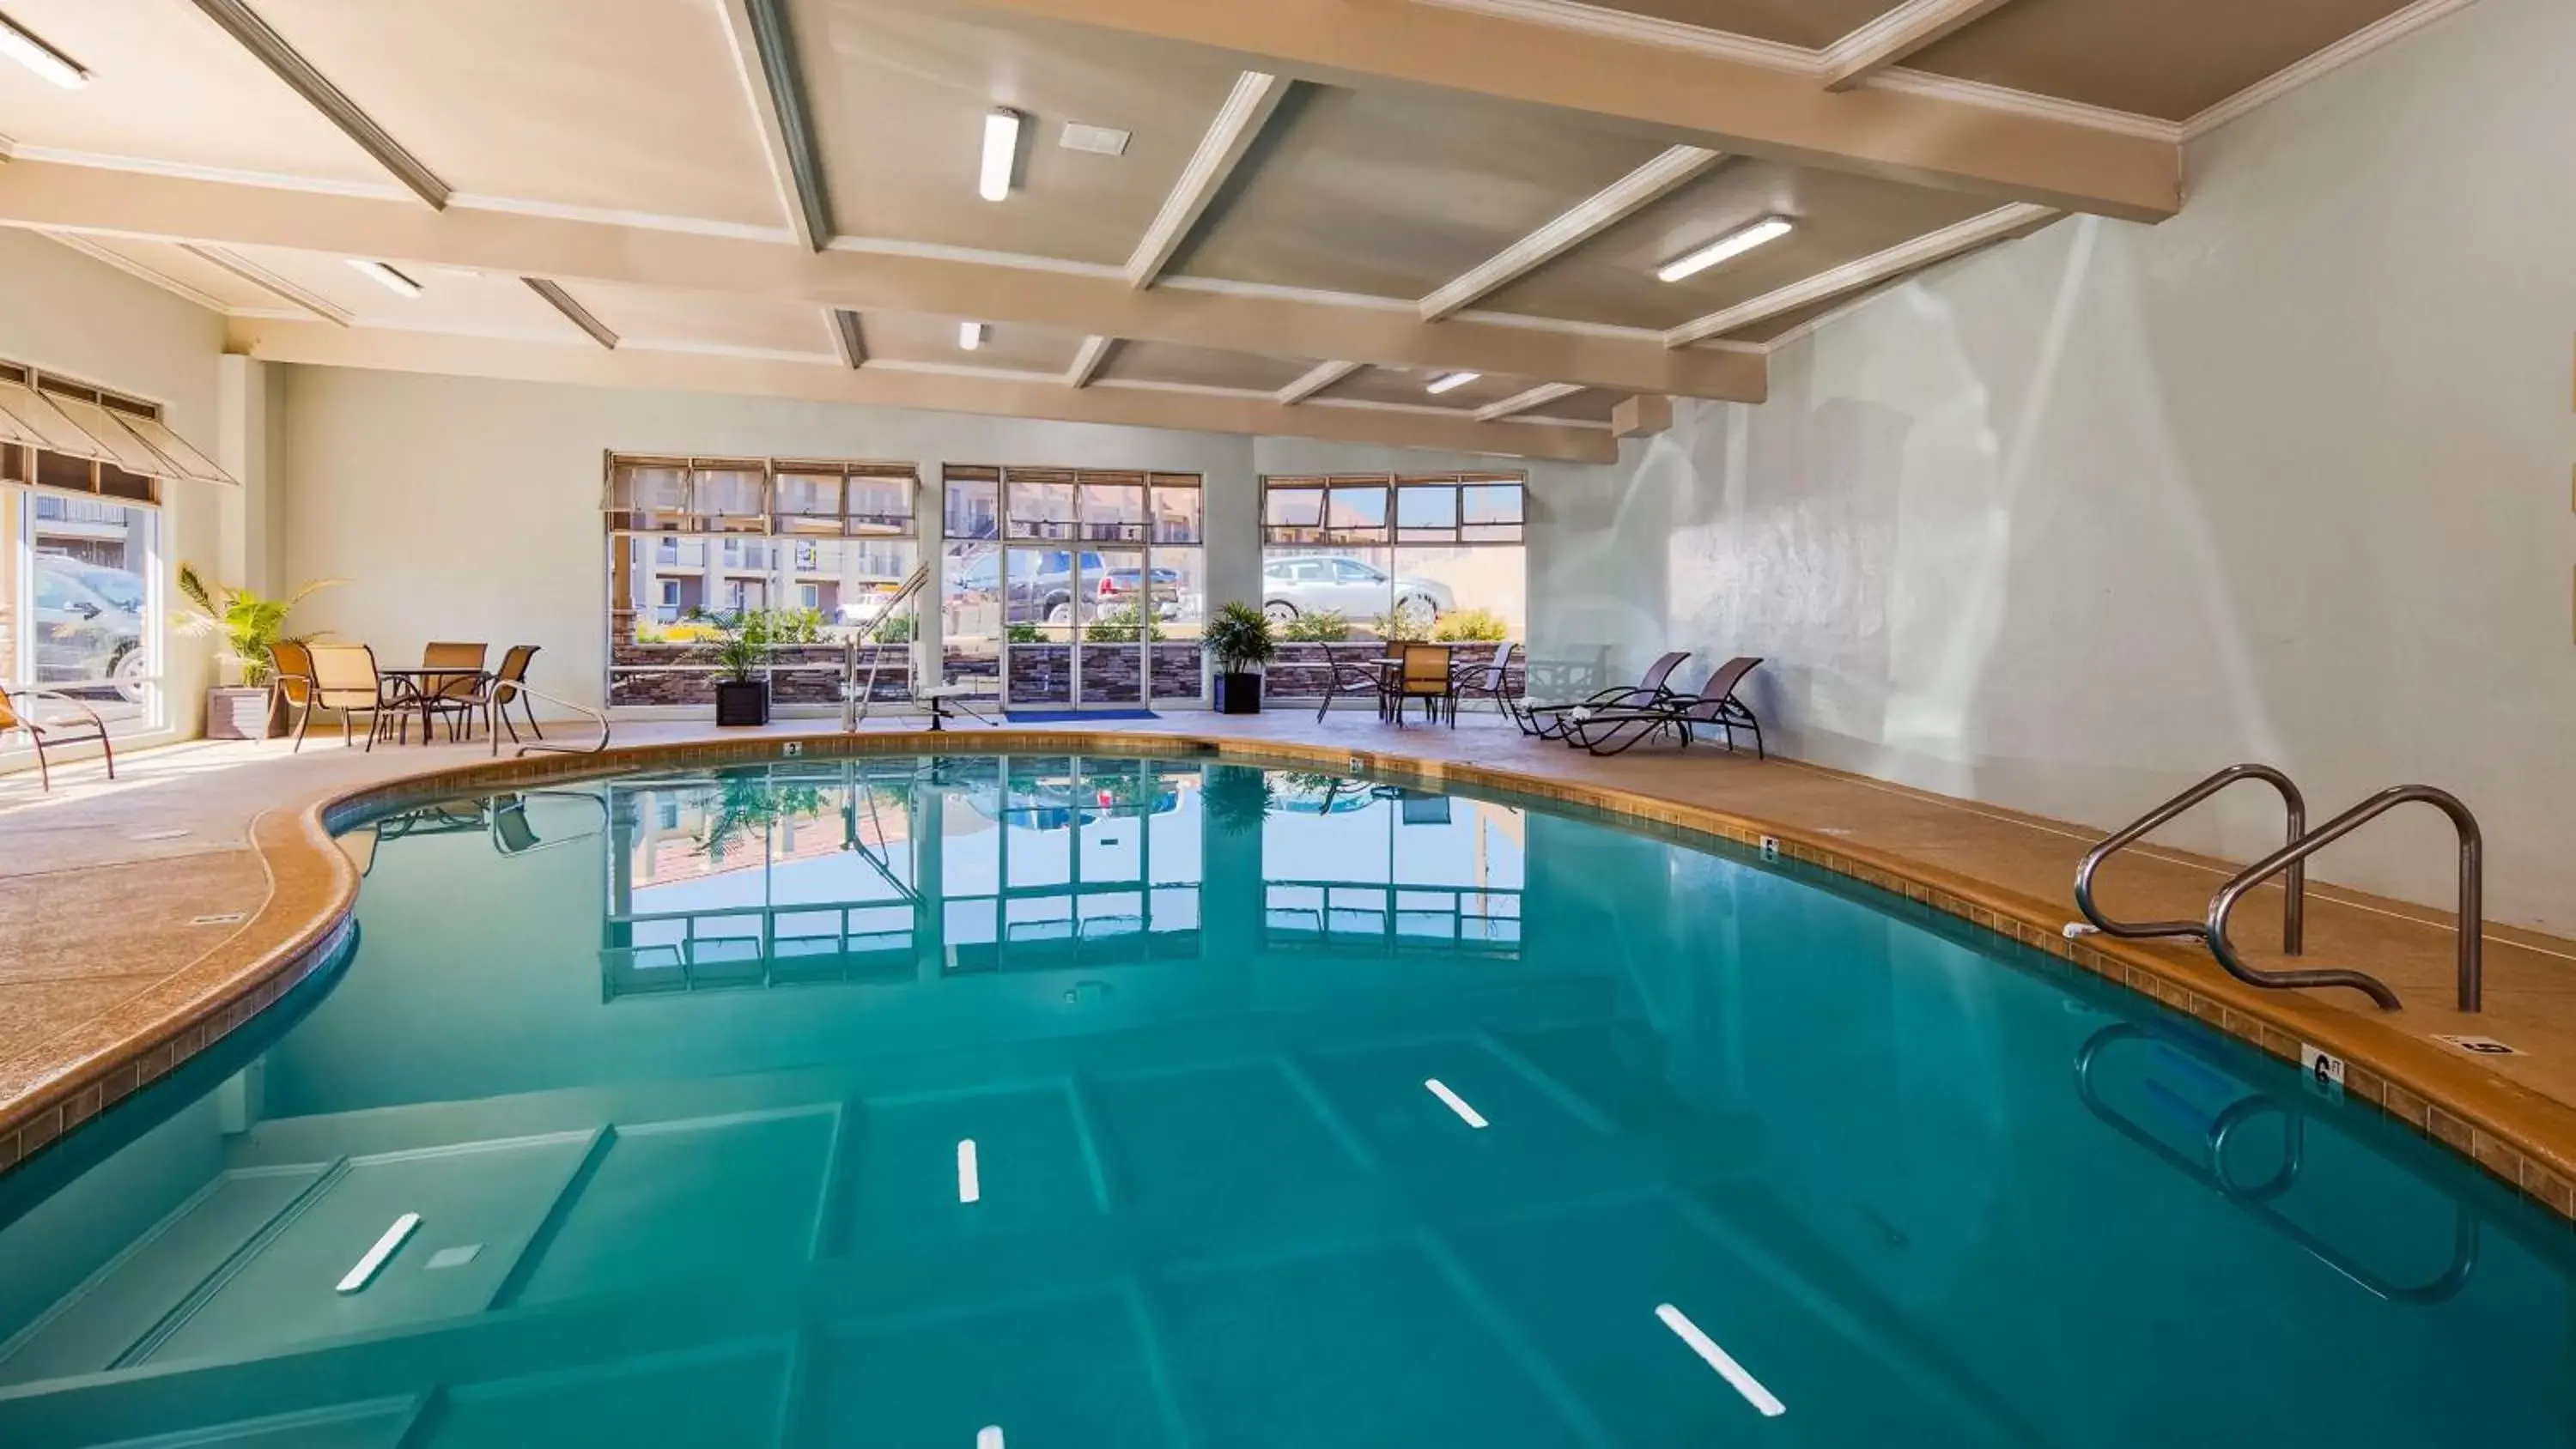 On site, Swimming Pool in Best Western Hoover Dam Hotel